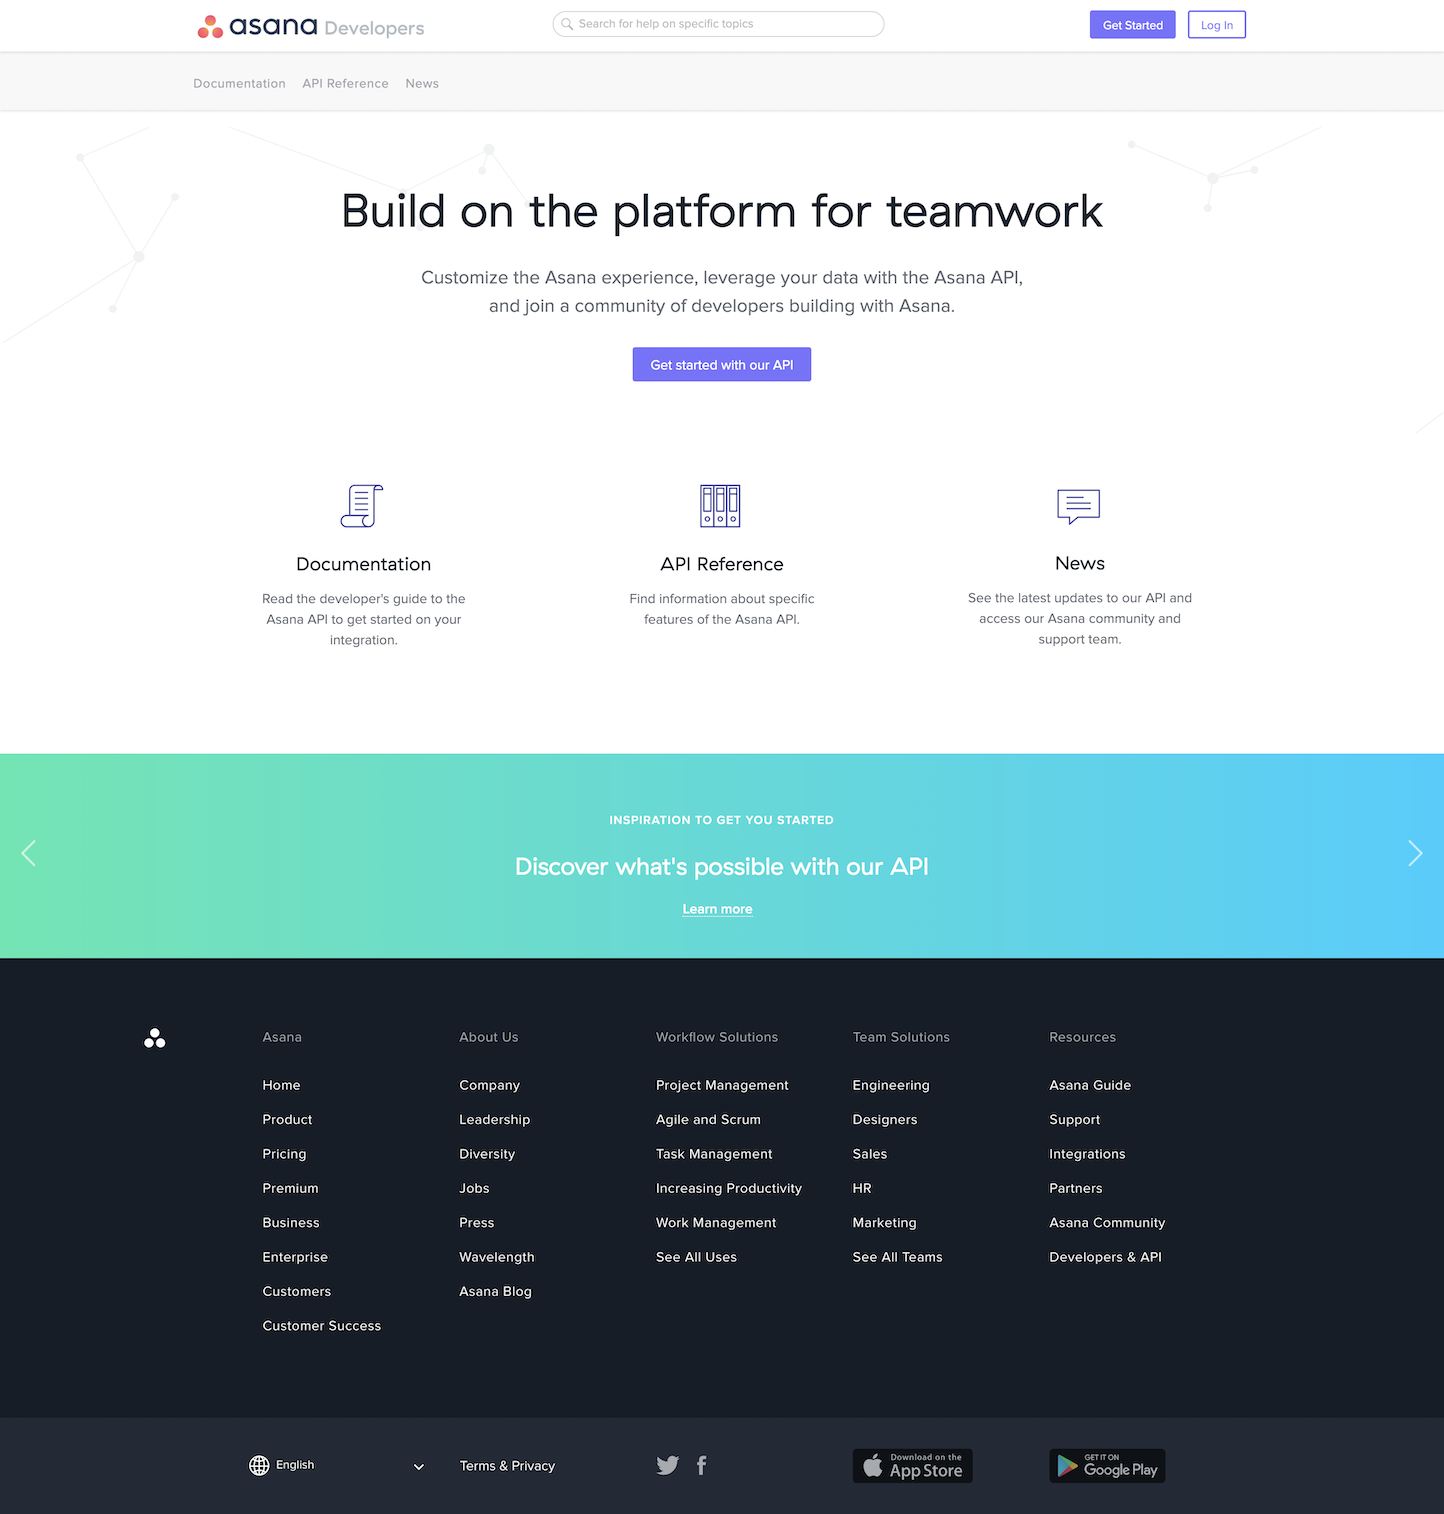 Screenshot of the Developers page from the Asana website.